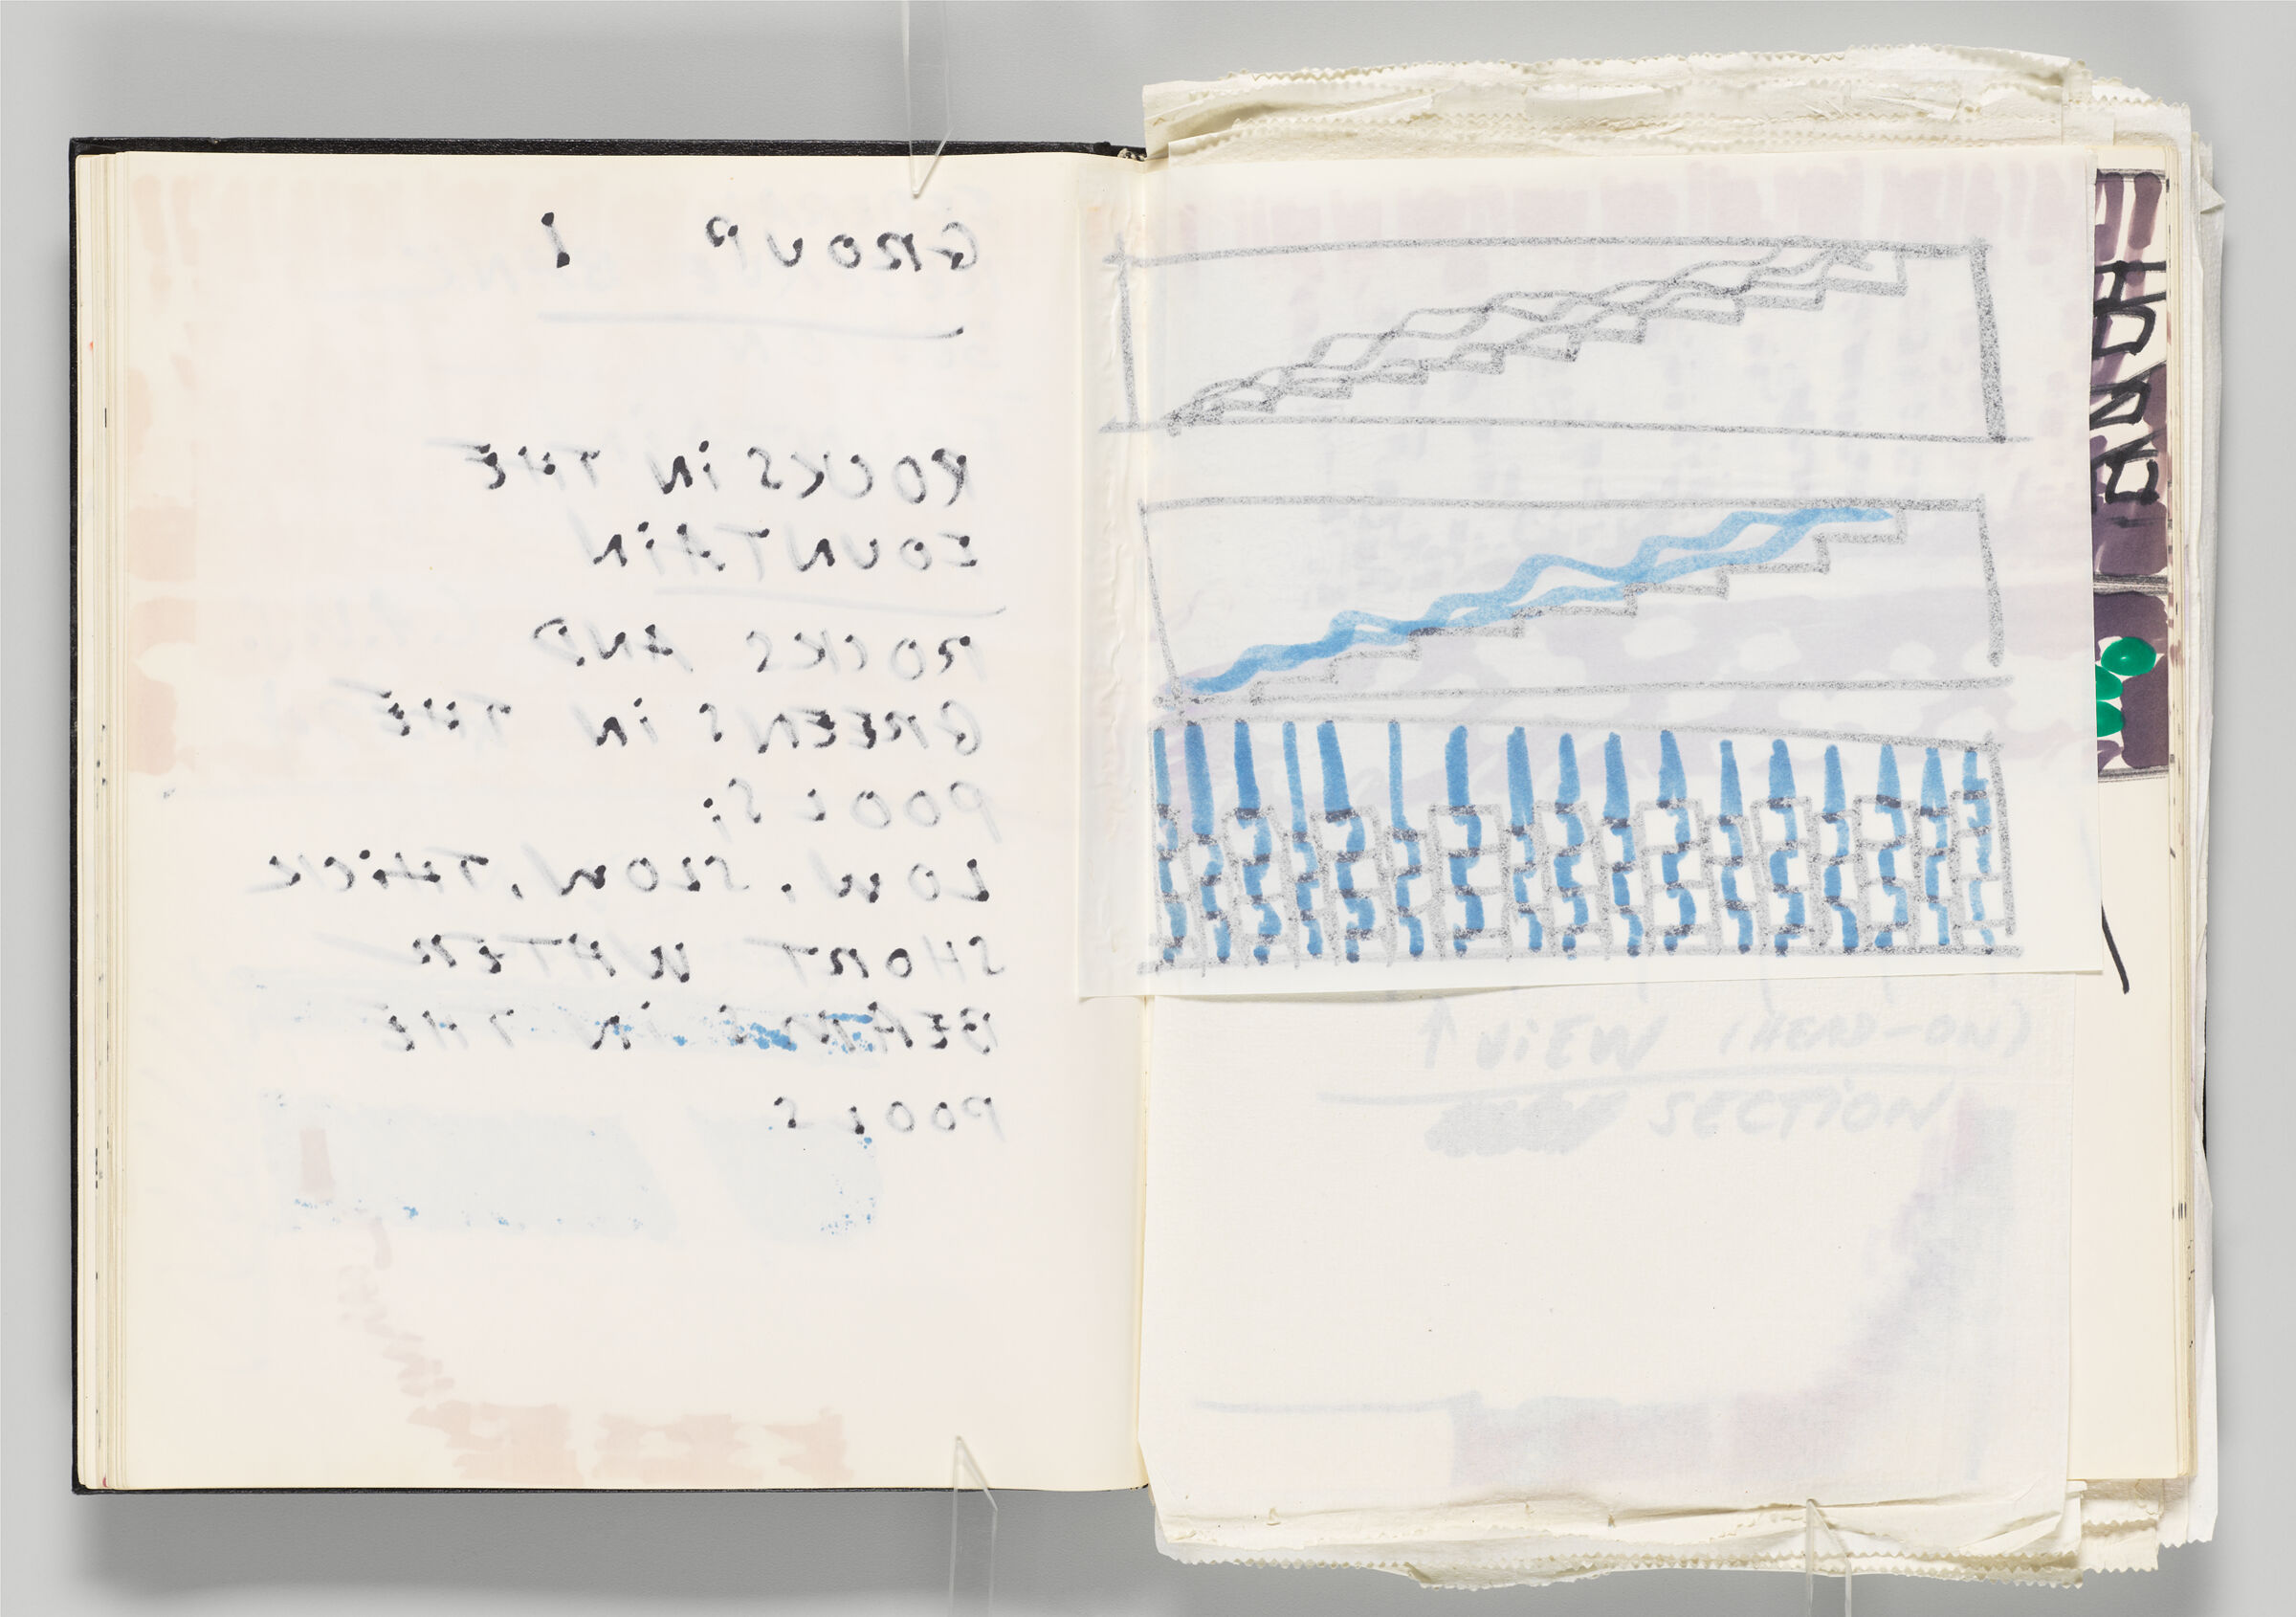 Untitled (Bleed-Through Of Previous Page With Adhered Design, Color Transfer, Left Page); Untitled (Design, Right Page)